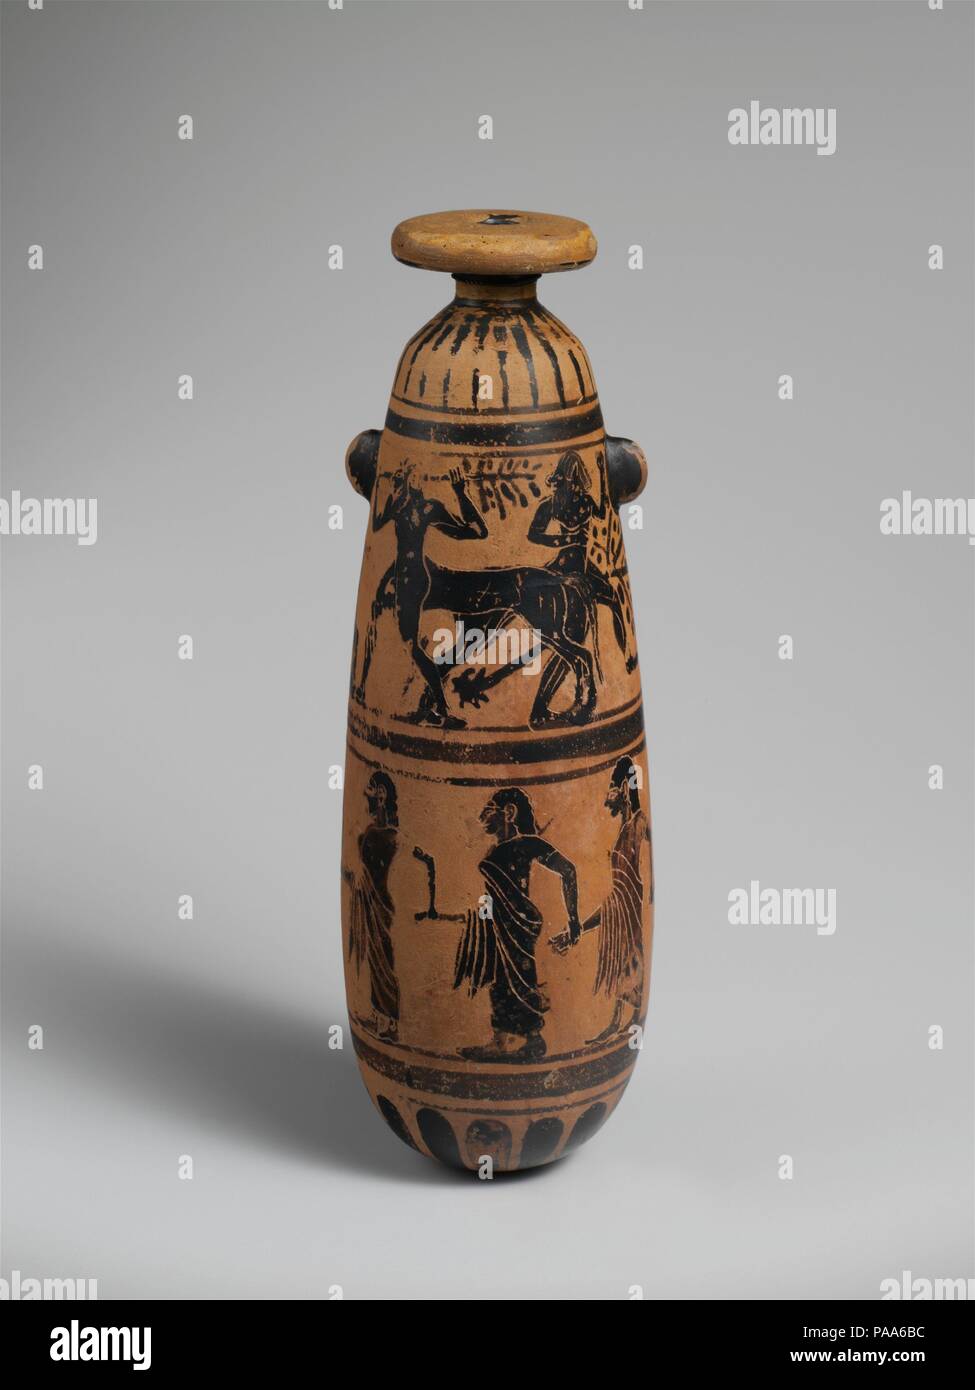 Terracotta alabastron (perfume vase). Culture: Etruscan. Dimensions: H. 7 1/8 in. (18.1 cm). Date: 6th century B.C..  Upper frieze, Herakles and centaurs  Lower frieze, flutist leading procession of women  The upper frieze, depicting Herakles in the company of three centaurs, is perhaps a reference to the story of the Greek hero's battle with Pholos and his fellow centaurs. The scene below has no obvious narrative connection to that one. This shape, frequently made of alabaster and copied by Corinthian potters, is rare with Etruscan potters working in Southern Etruria. Museum: Metropolitan Mus Stock Photo